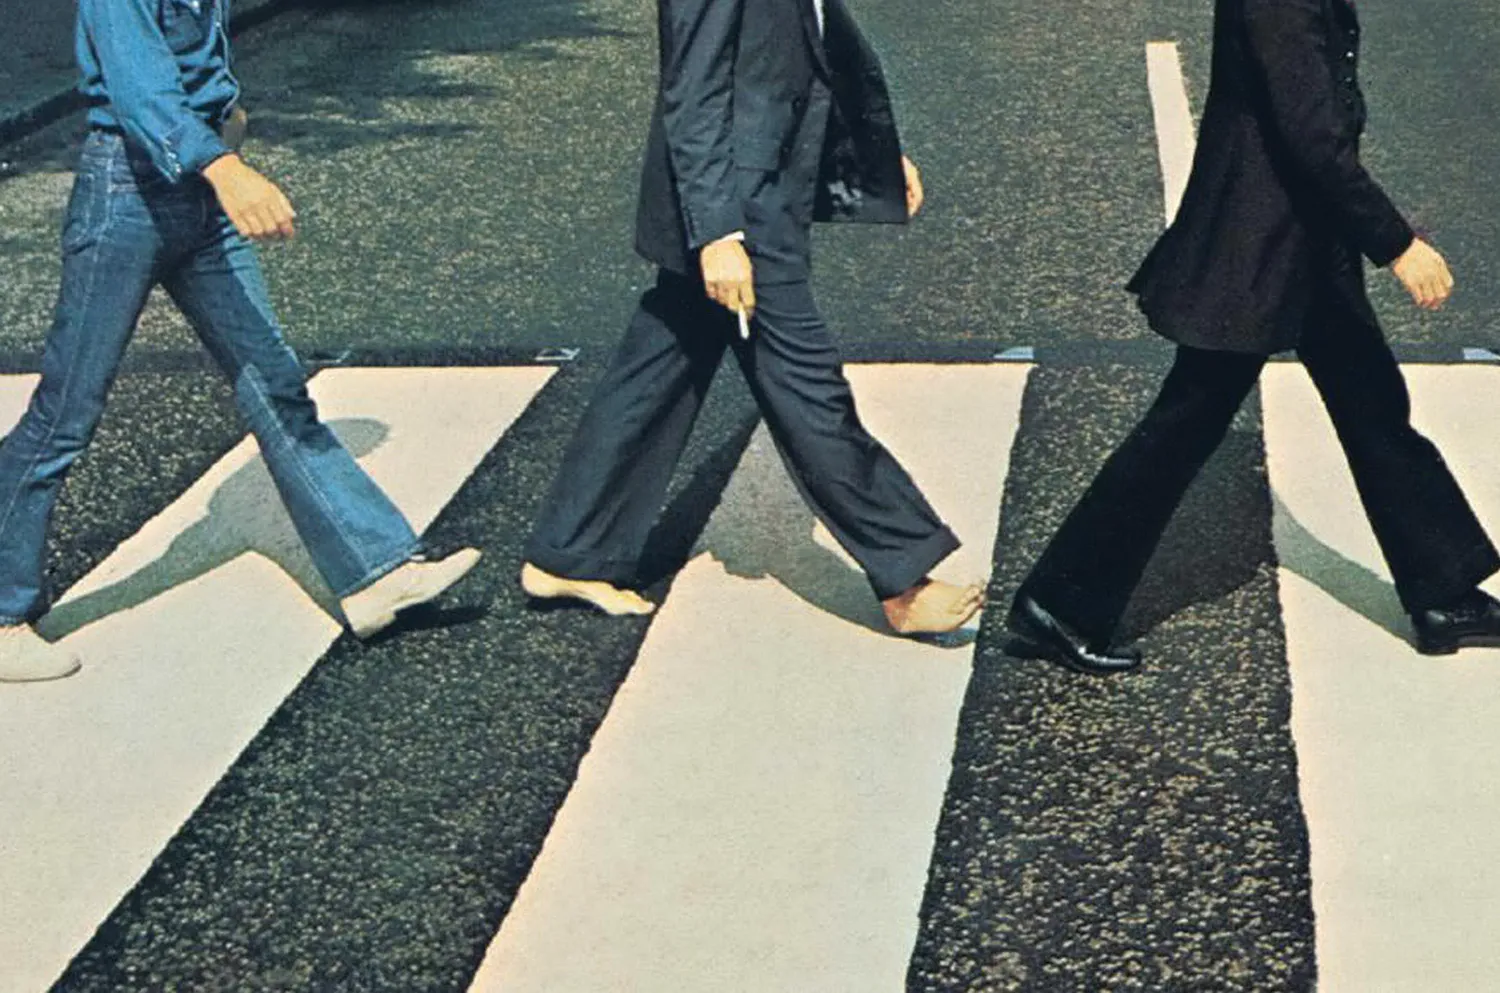 The "Abbey Road" album cover with a focus on Paul's bare feet